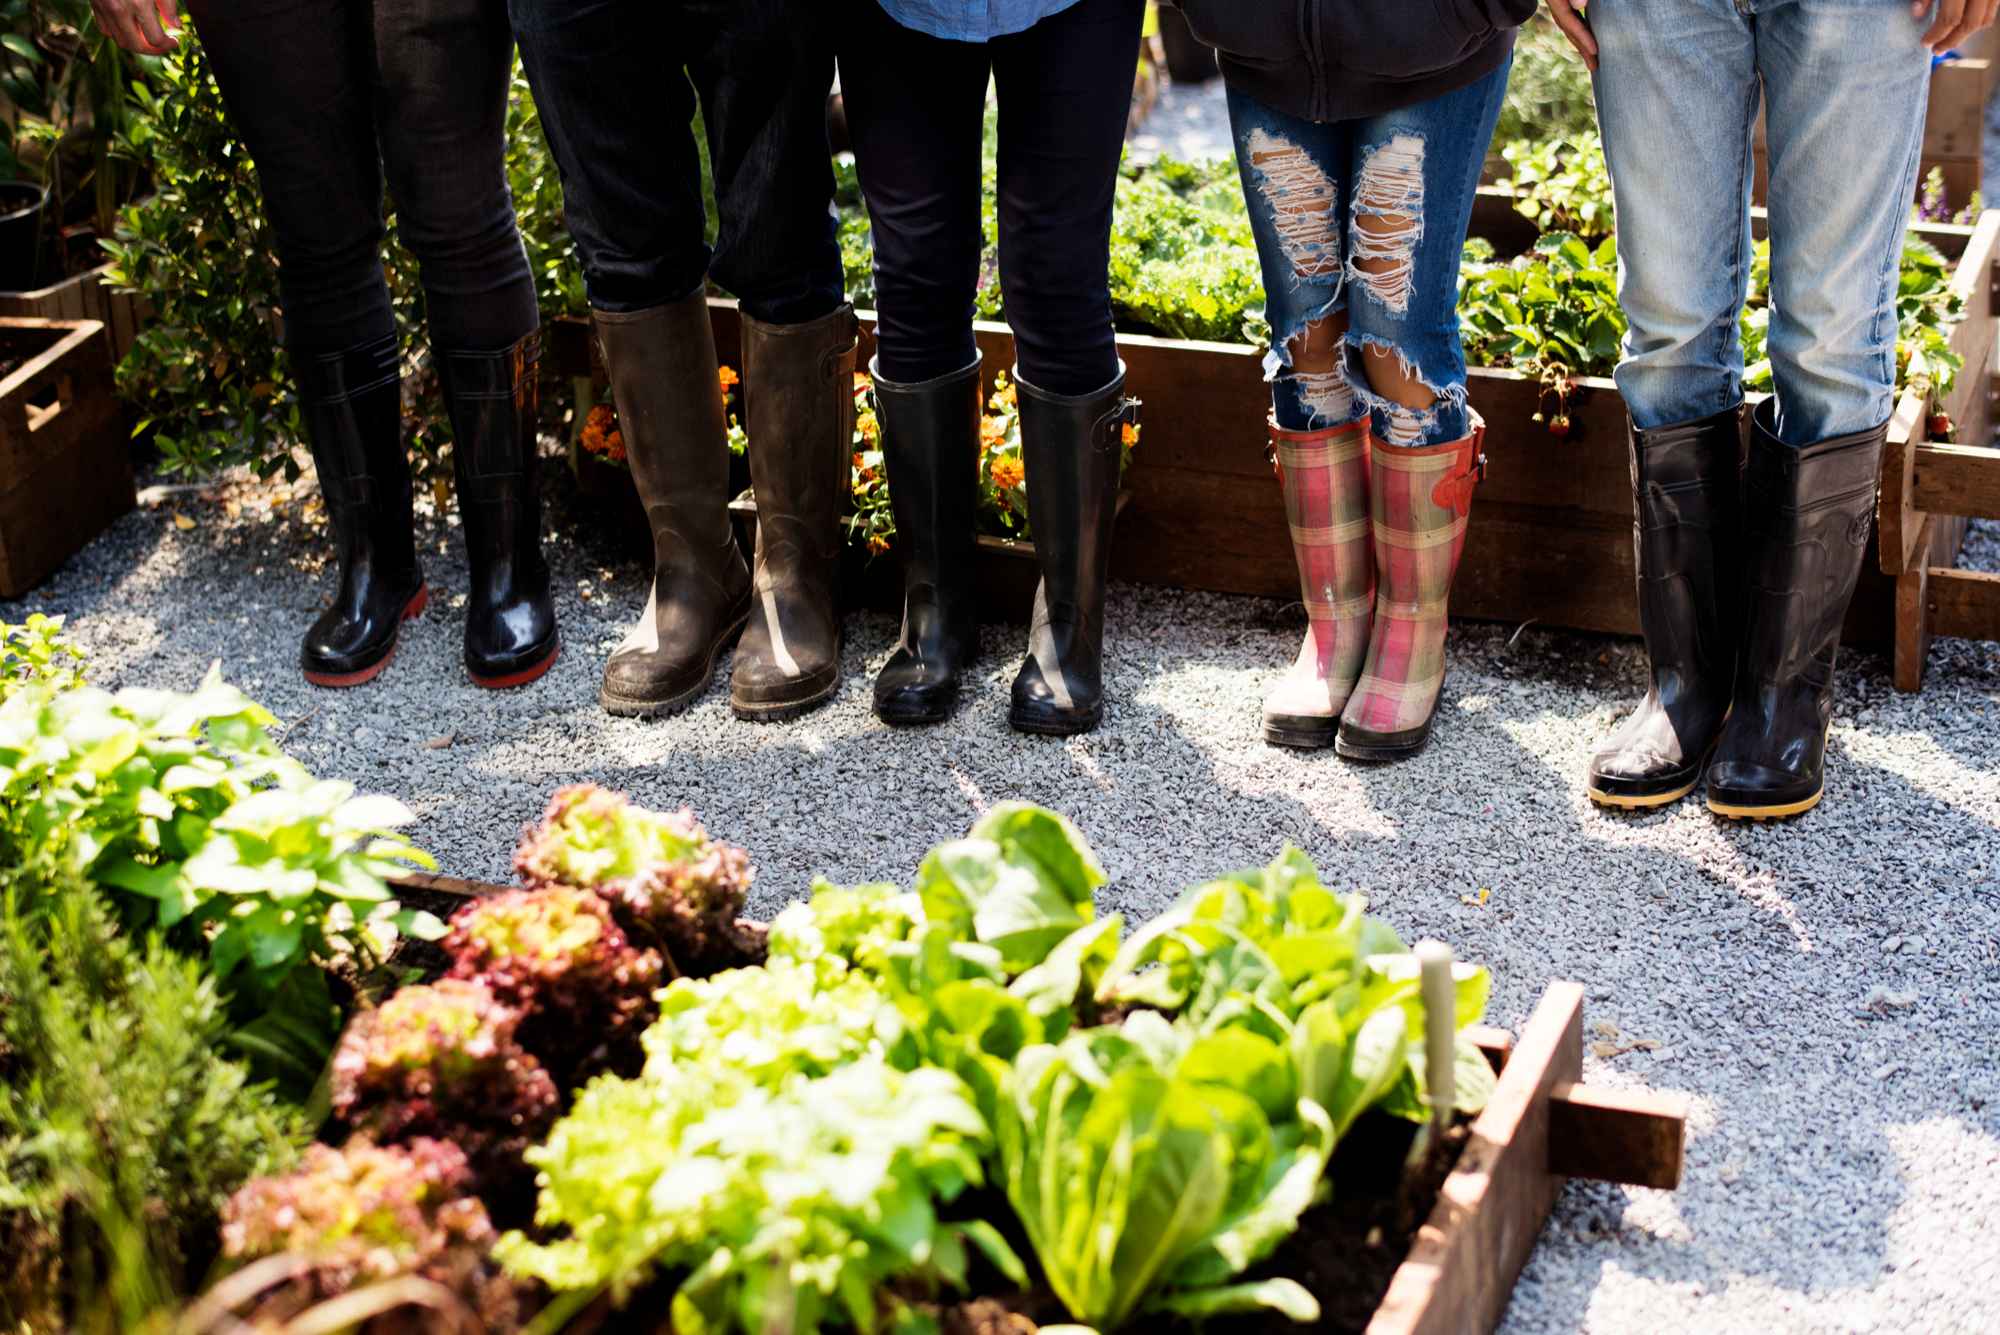 group-people-planting-vegetable-greenhouse-boots